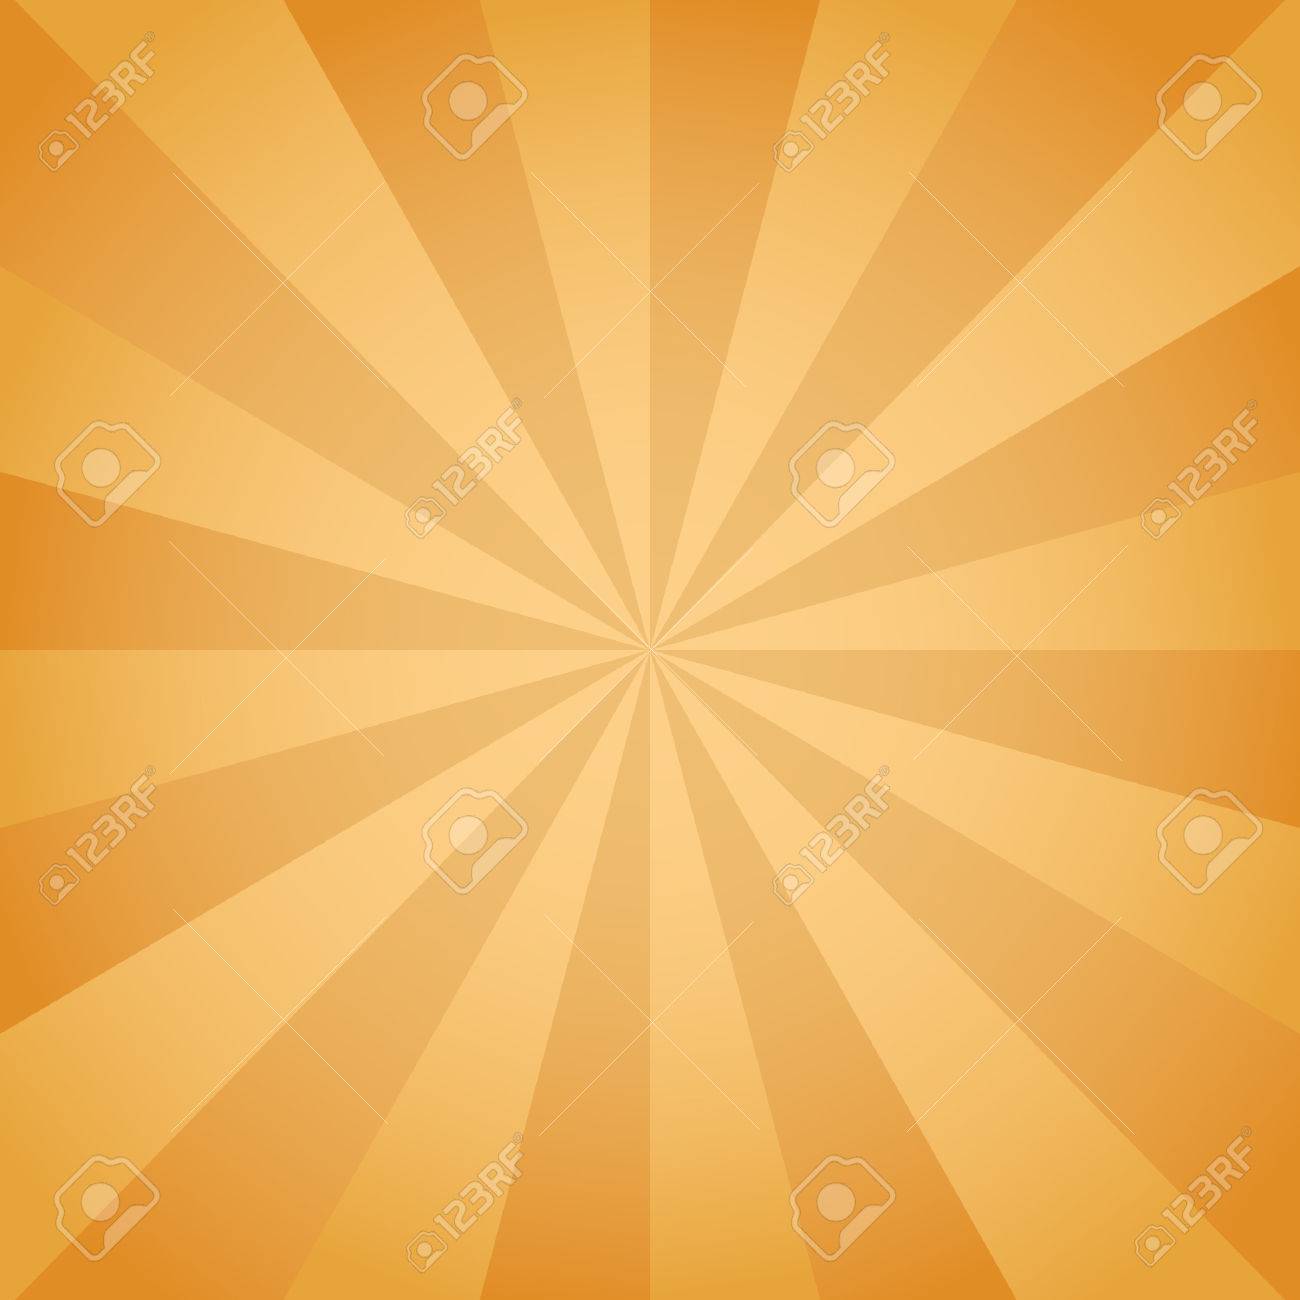 Radial Background With Radiating Rays Of Orange In